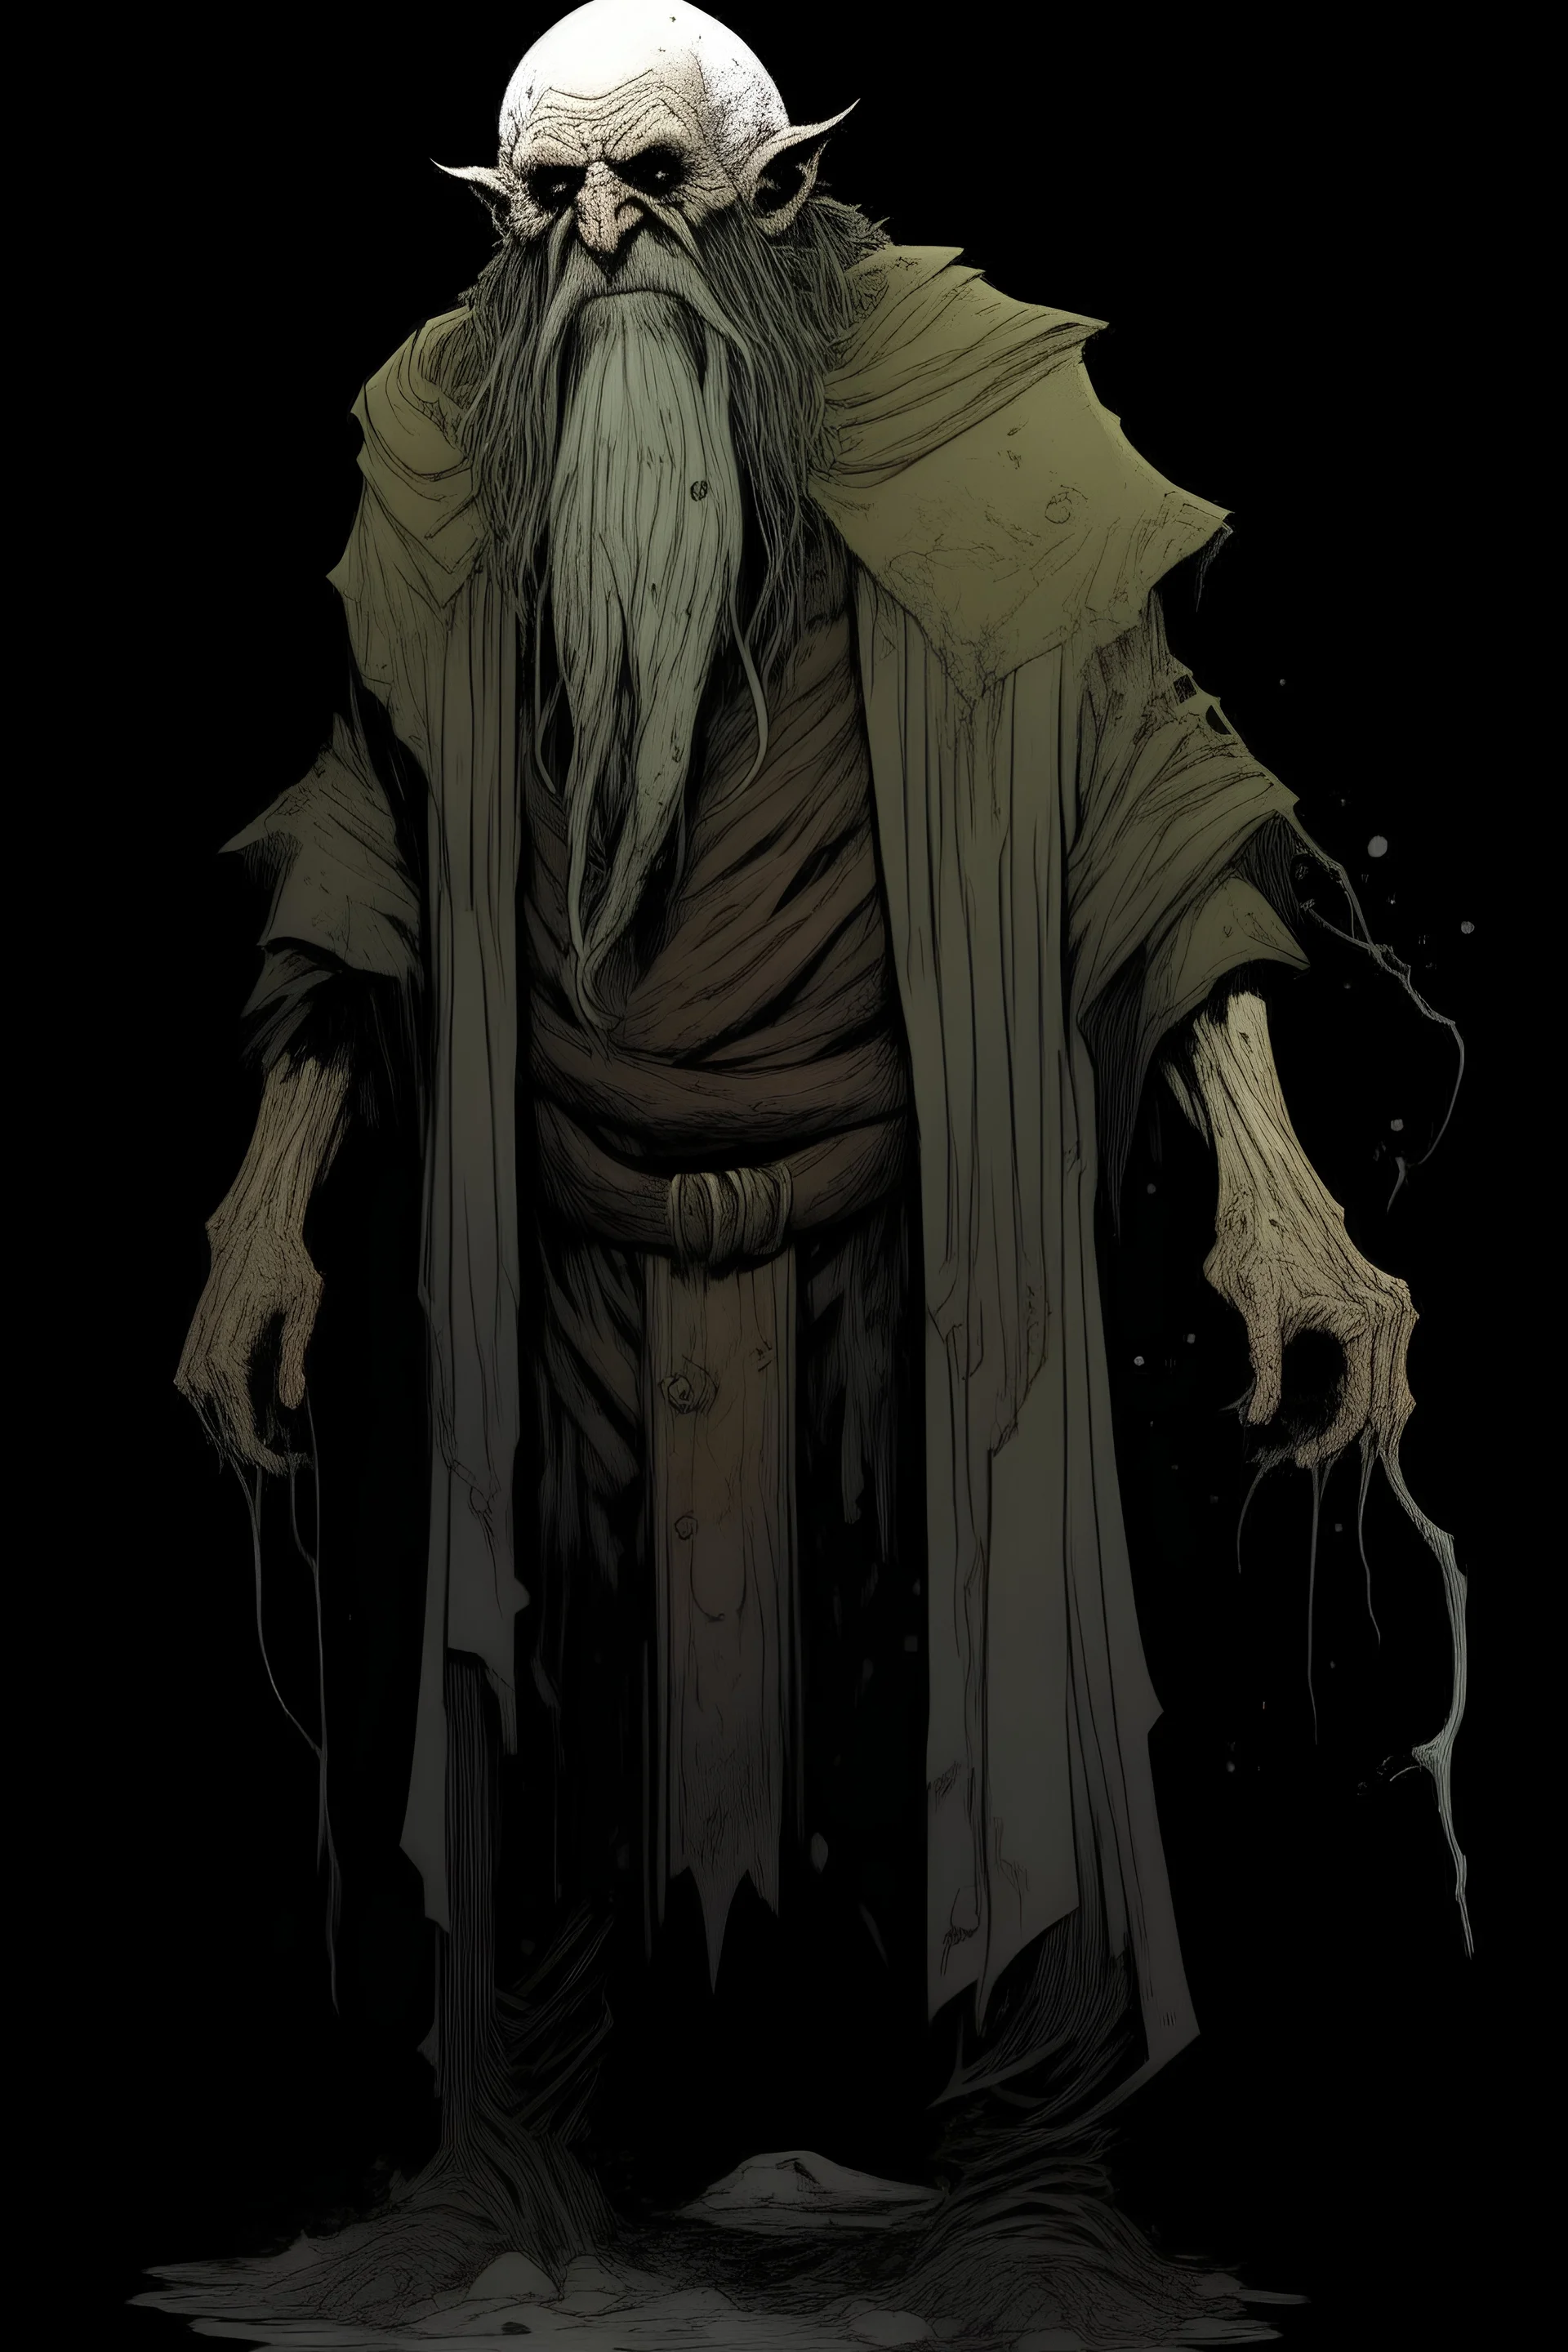 highly detailed character concept, full body illustration of a hardened, mindflayer dwarf, finely defined but decayed facial features, necrotic skin, in the comic book art style of Mike Mignola, Bill Sienkiewicz and Jean Giraud Moebius, , highly detailed, grainy, gritty textures, , dramatic natural lighting